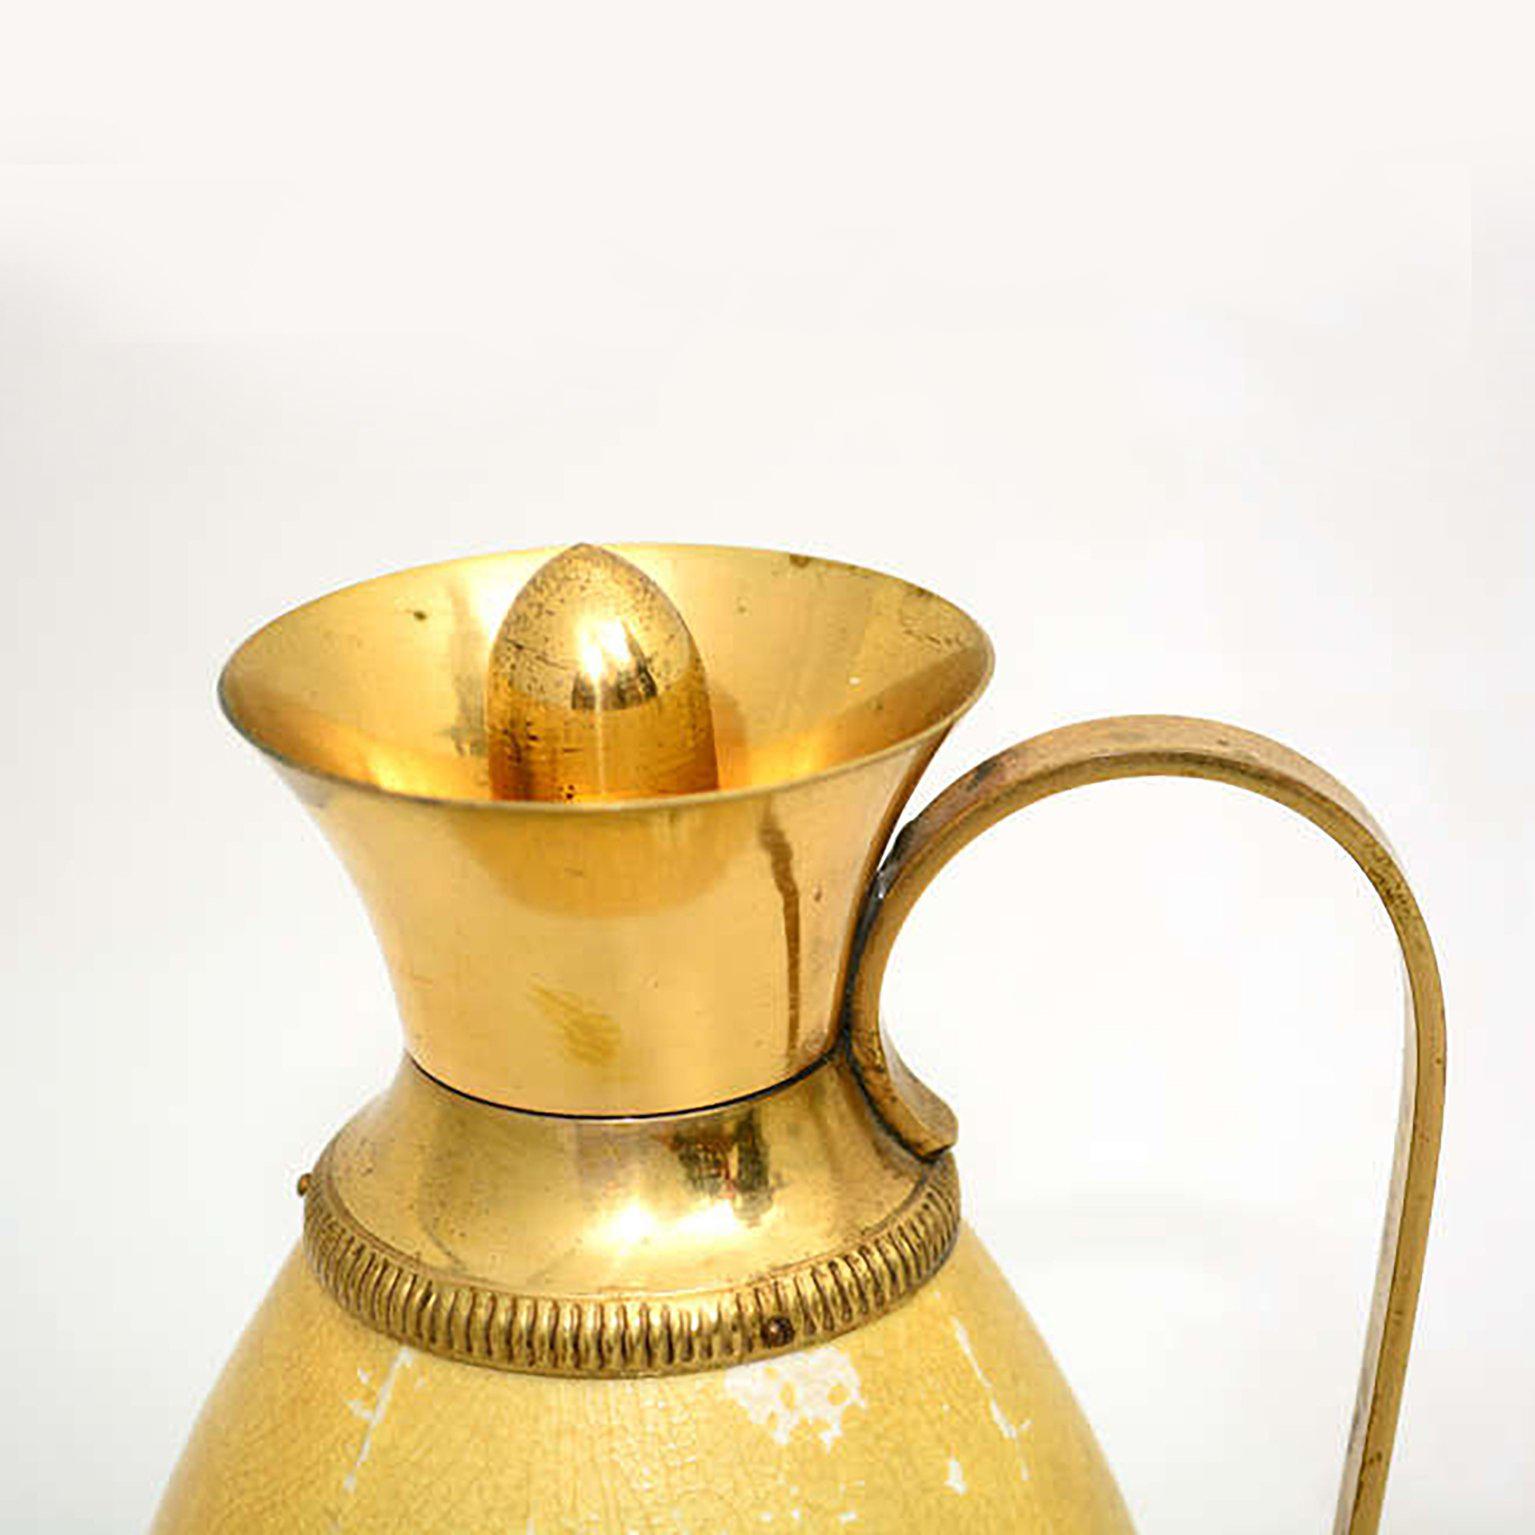 Aldo Tura made in Italy by Macabo circa 1940s
Goatskin Parchment and Brass lovely vintage CARAFE Pitcher ITALY
Carafe with original matching lid exquisite detail
12h x 5 diameter x 6D
Original unrestored finish with patina present.
Parchment with